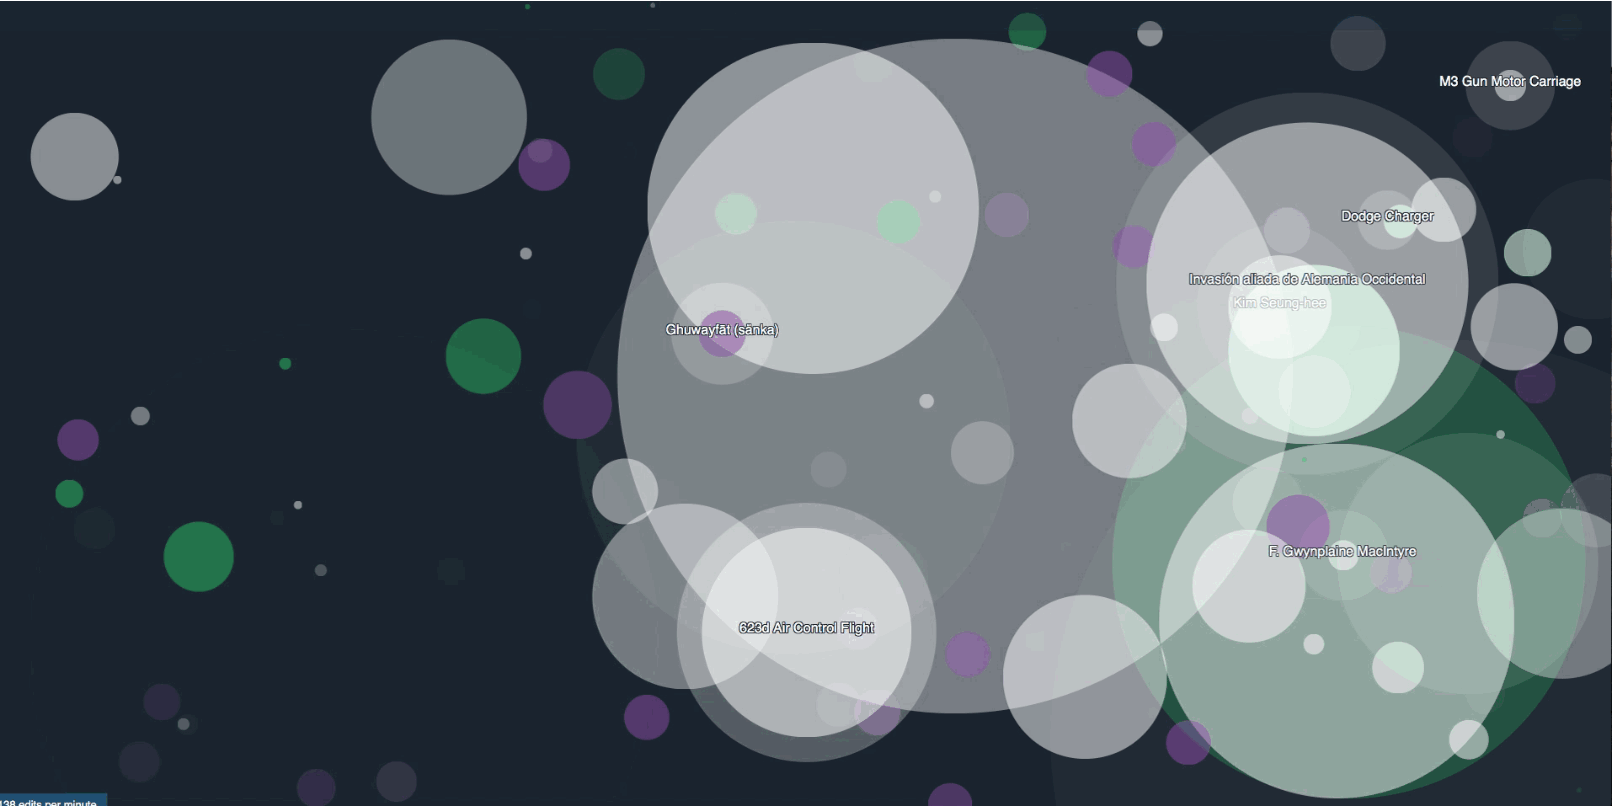 This mesmerizing Wikipedia visualizer also lets you listen to updates in real-time